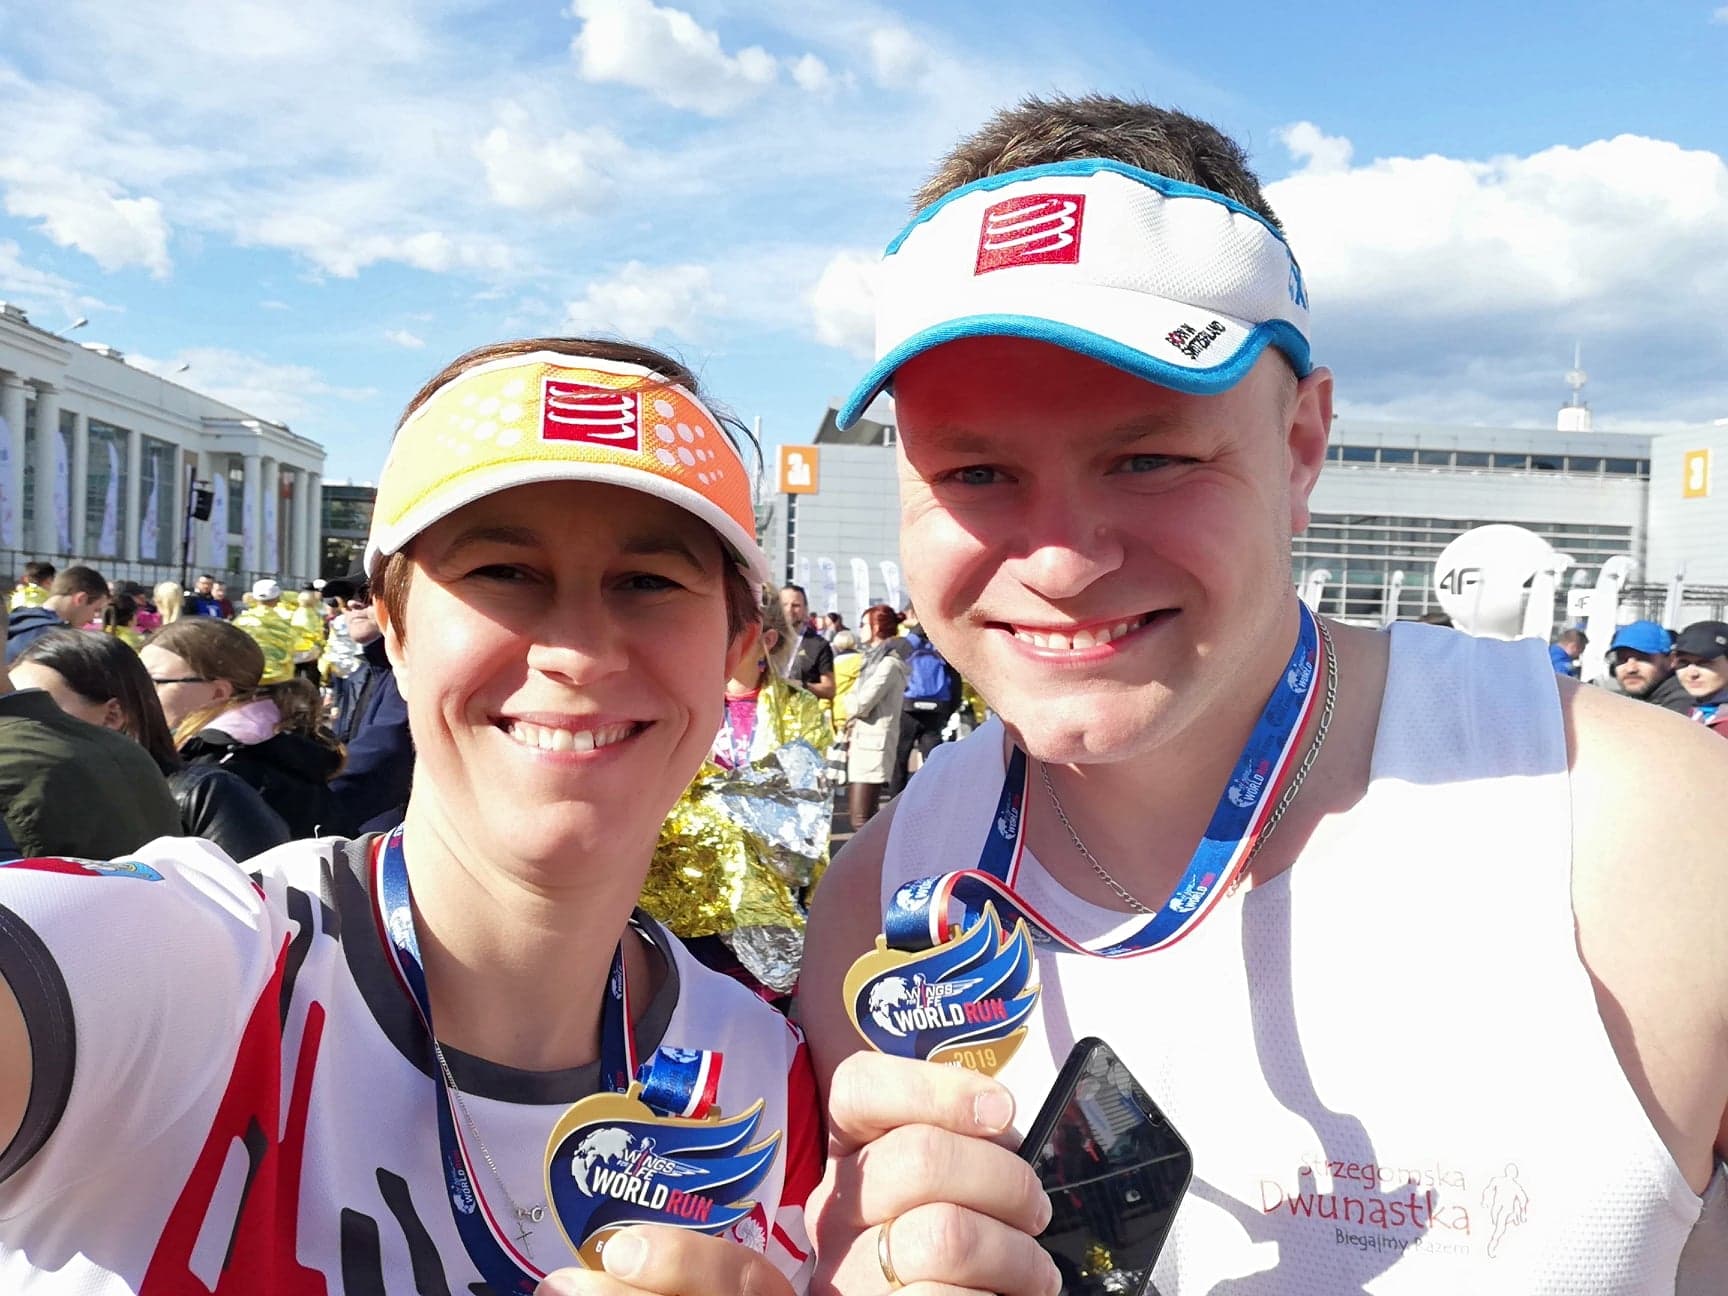 WINGS FOR LIFE WORLD RUN - S12